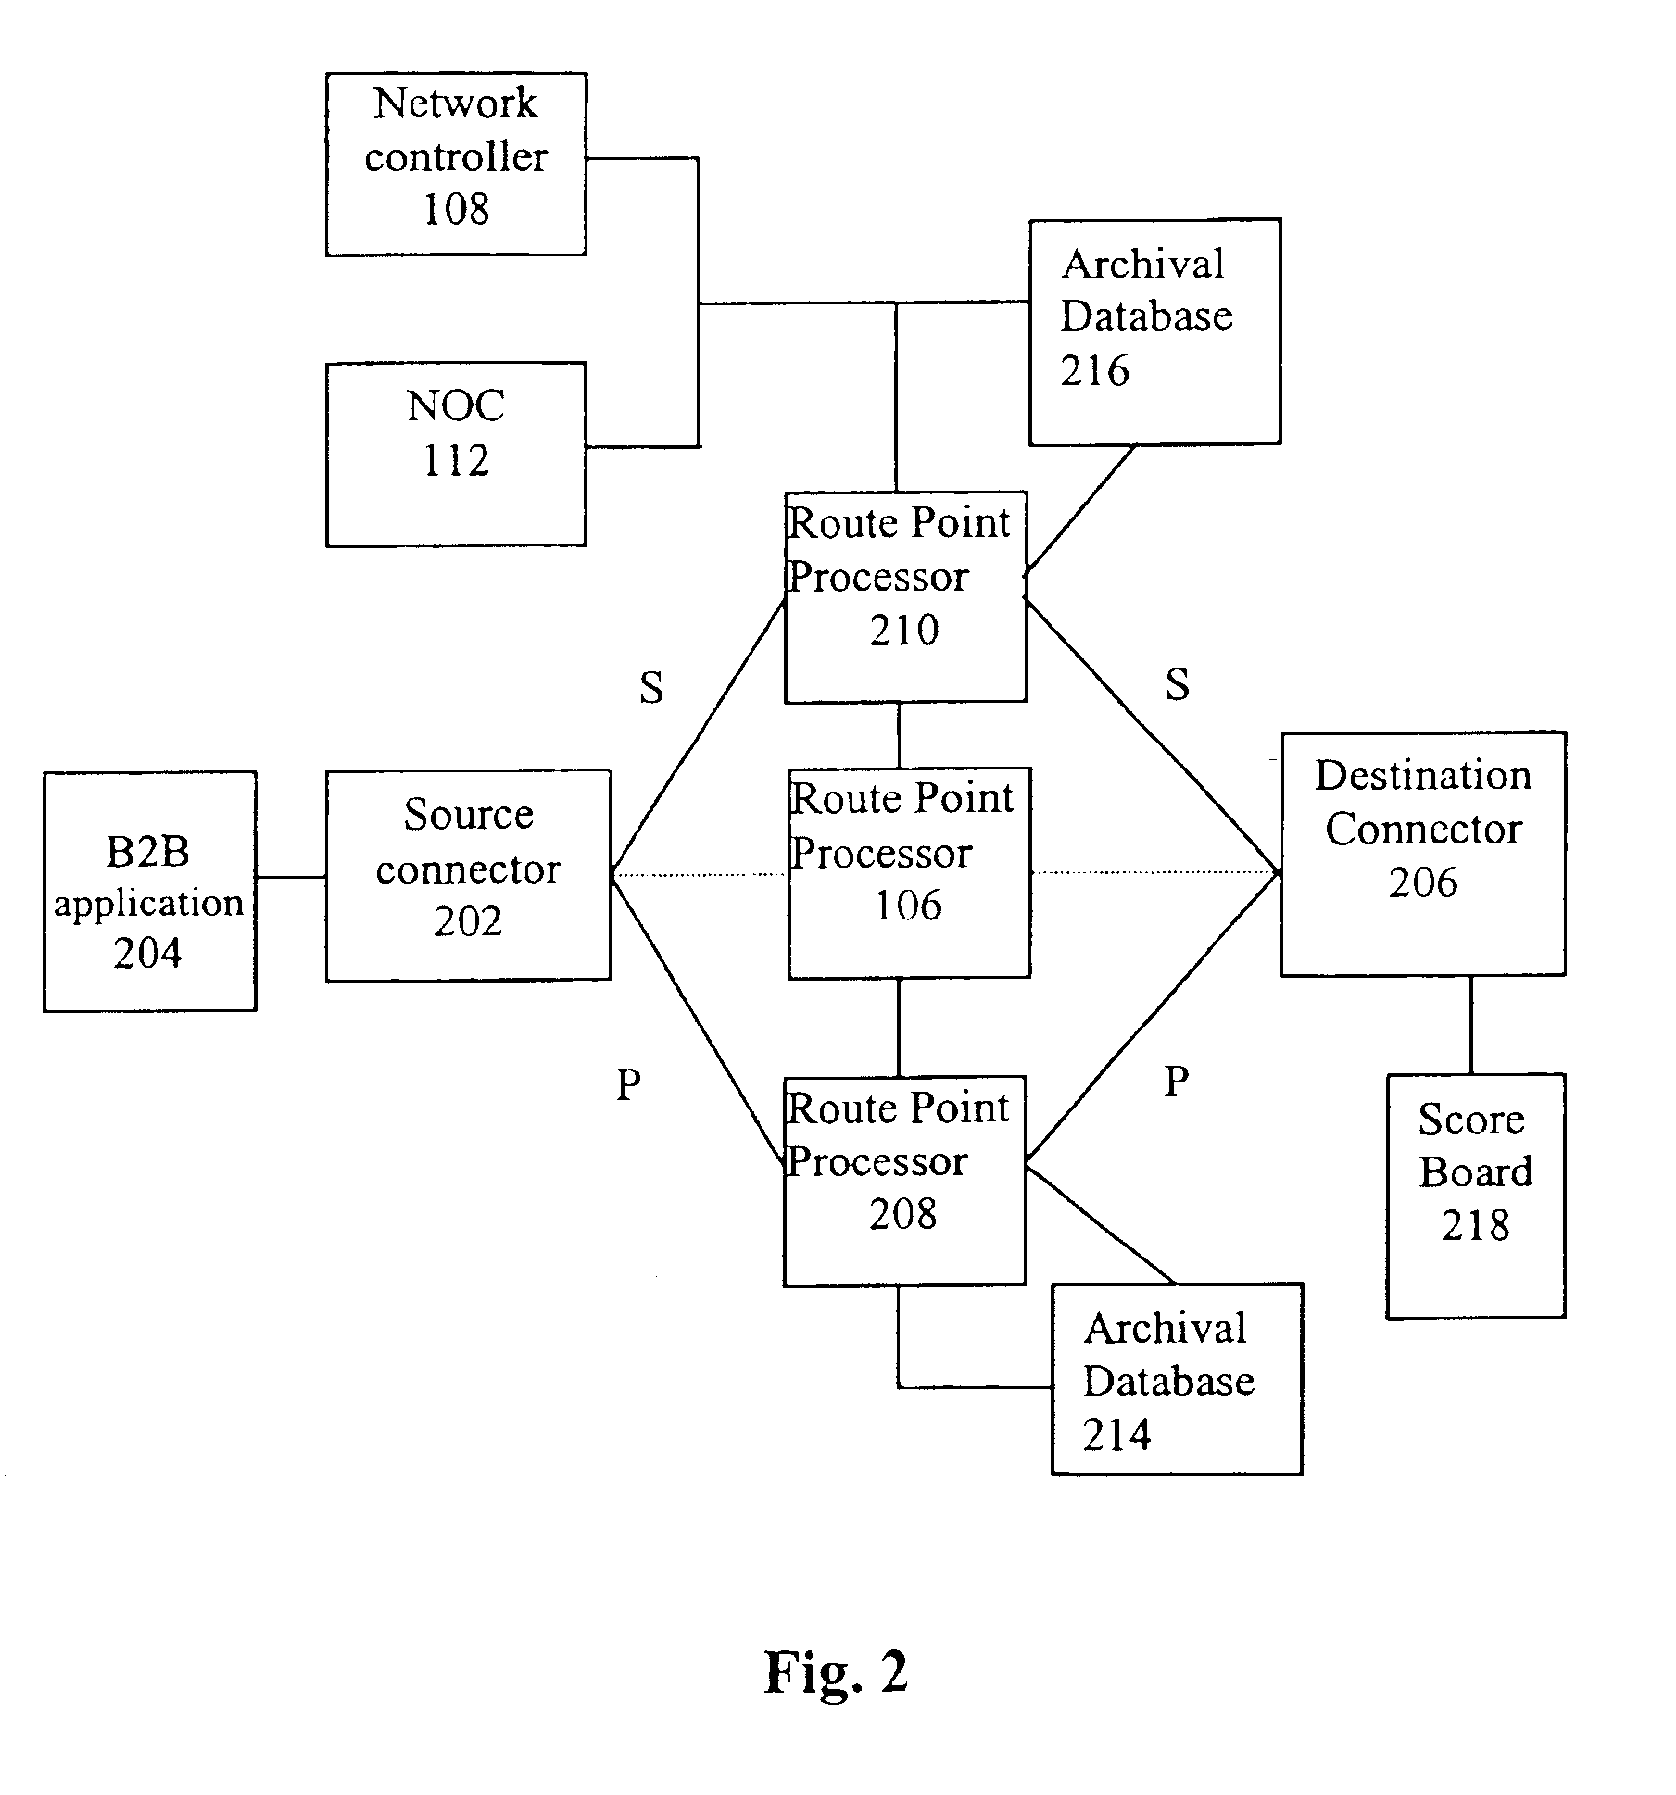 Archival database system for handling information and information transfers in a computer network